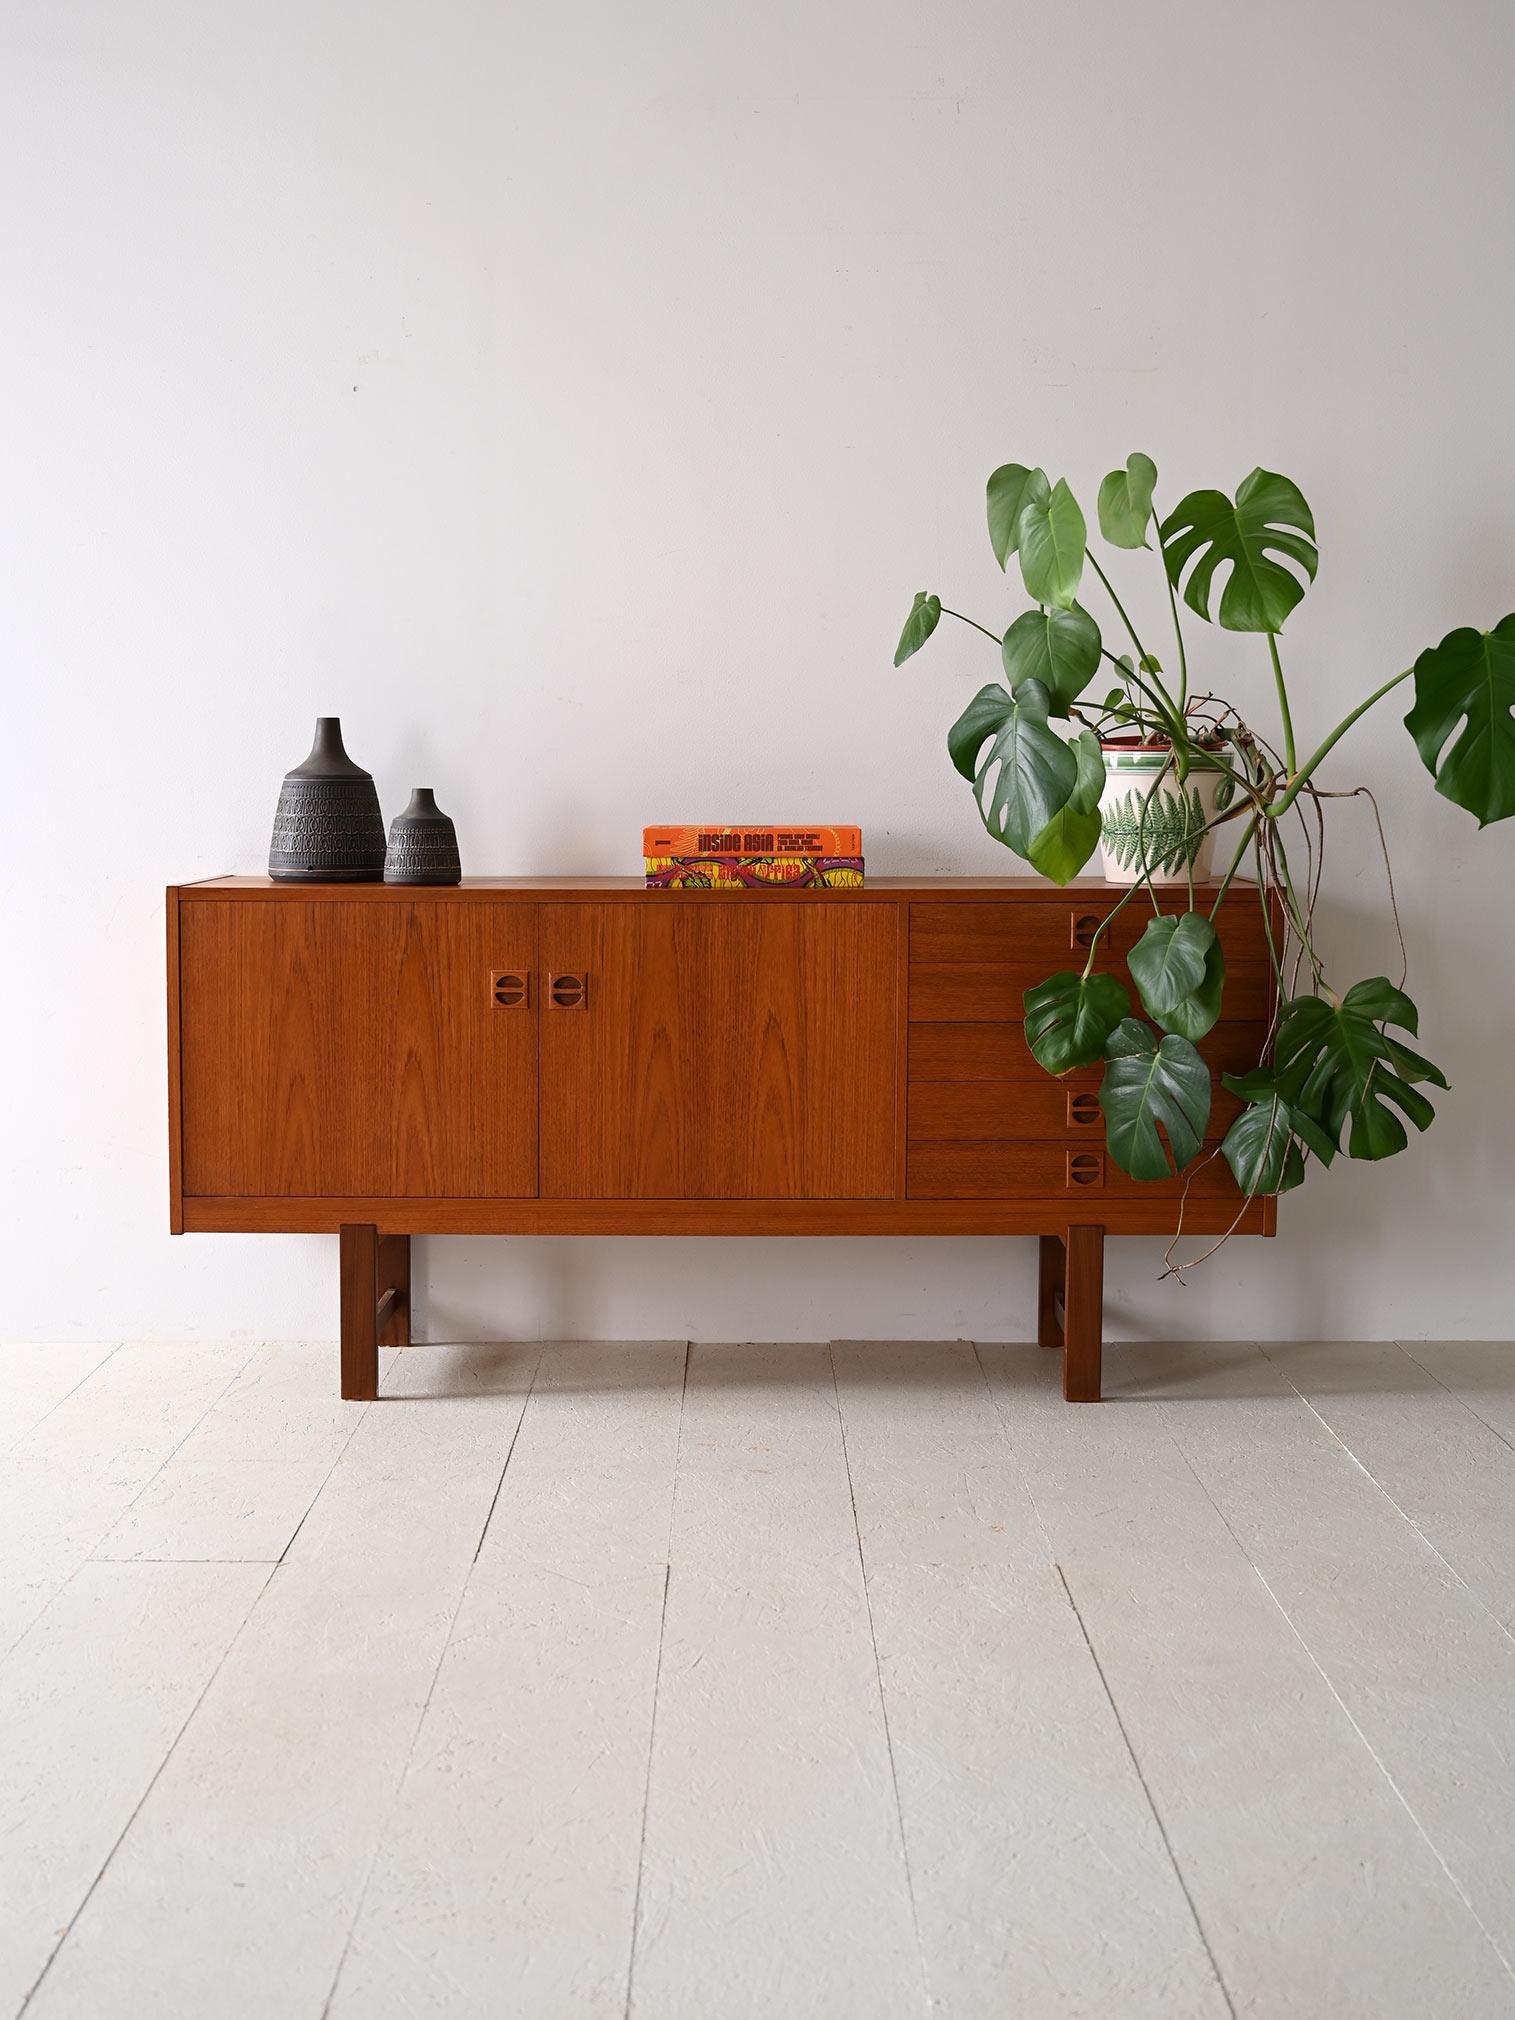 Scandinavian 1960s teak sideboard. A piece of original modernism with timeless style. The simple, straightforward structure features a storage compartment closed by two hinged doors on one side and five drawers on the other. The carved wooden handle